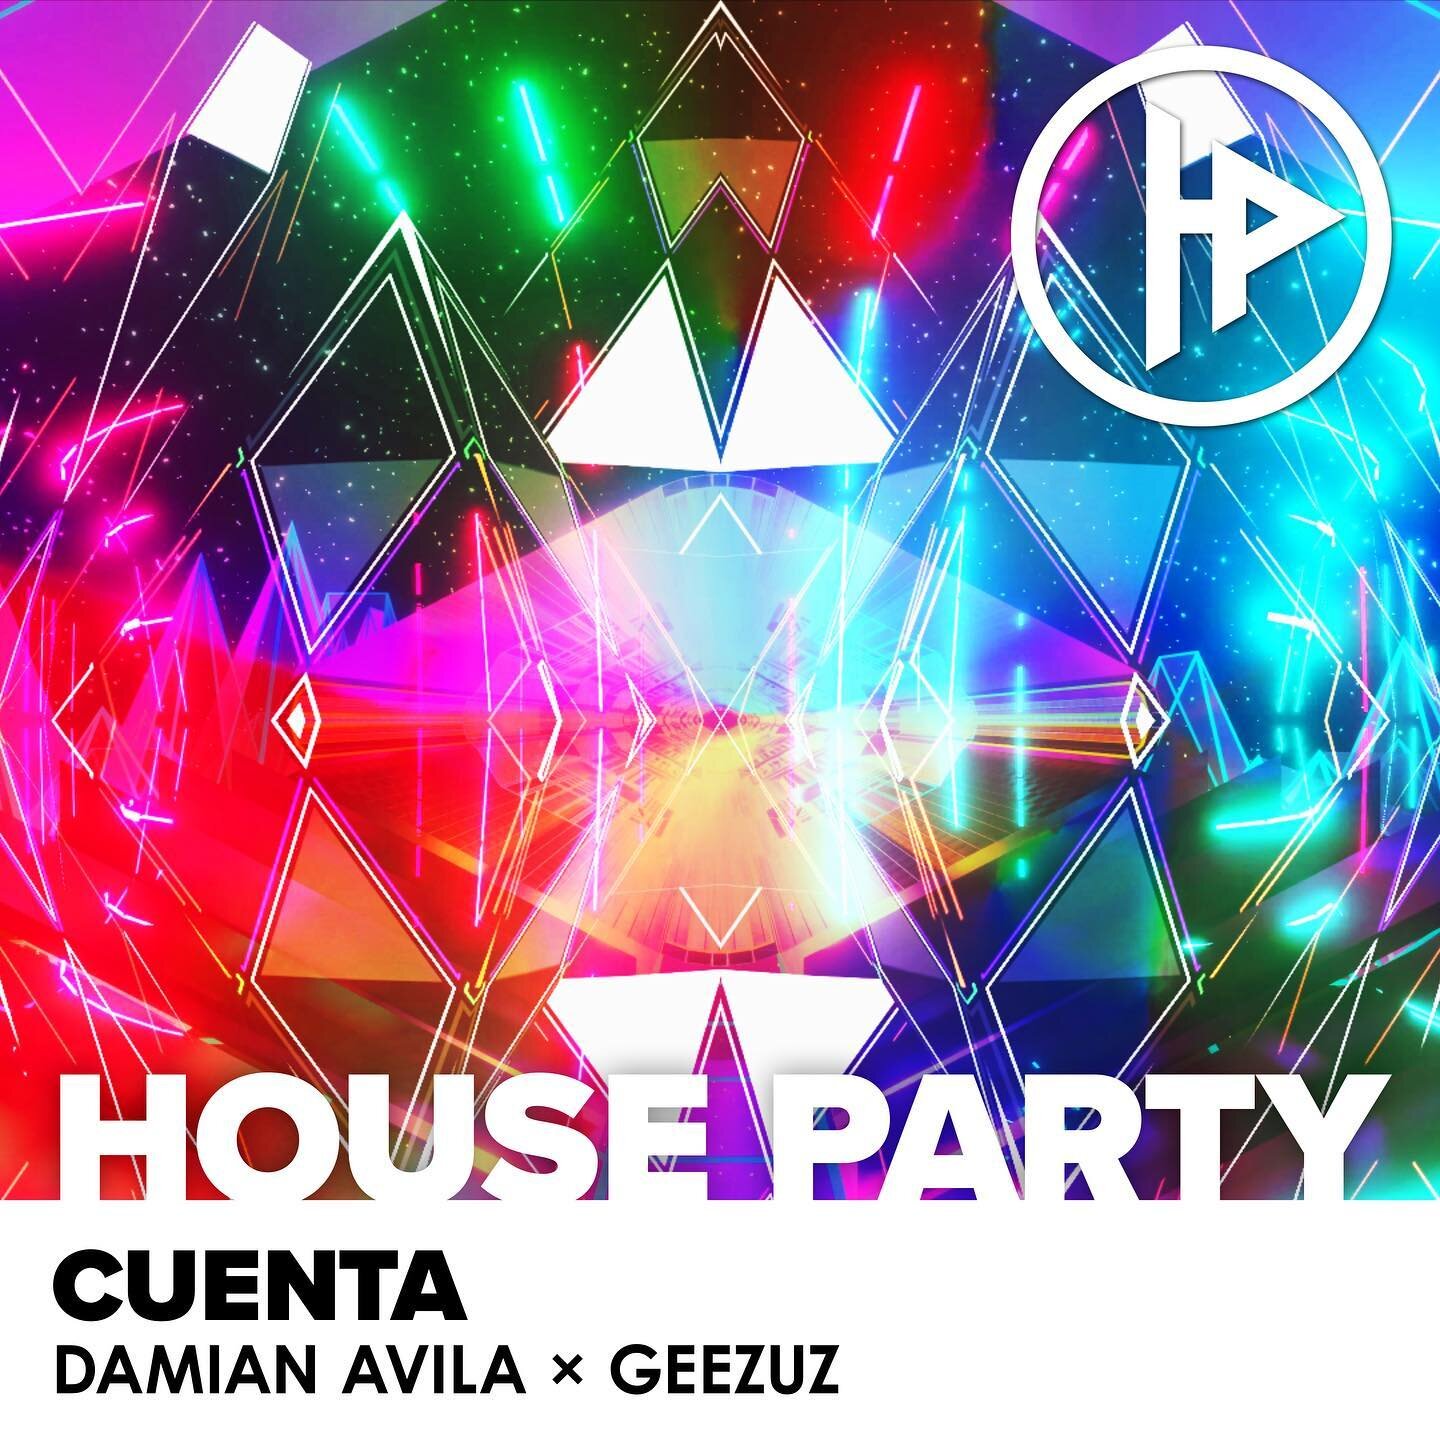 Get hype to new track from @damianavilawey x @geezuzmusic with #Cuenta out now 💃🕺